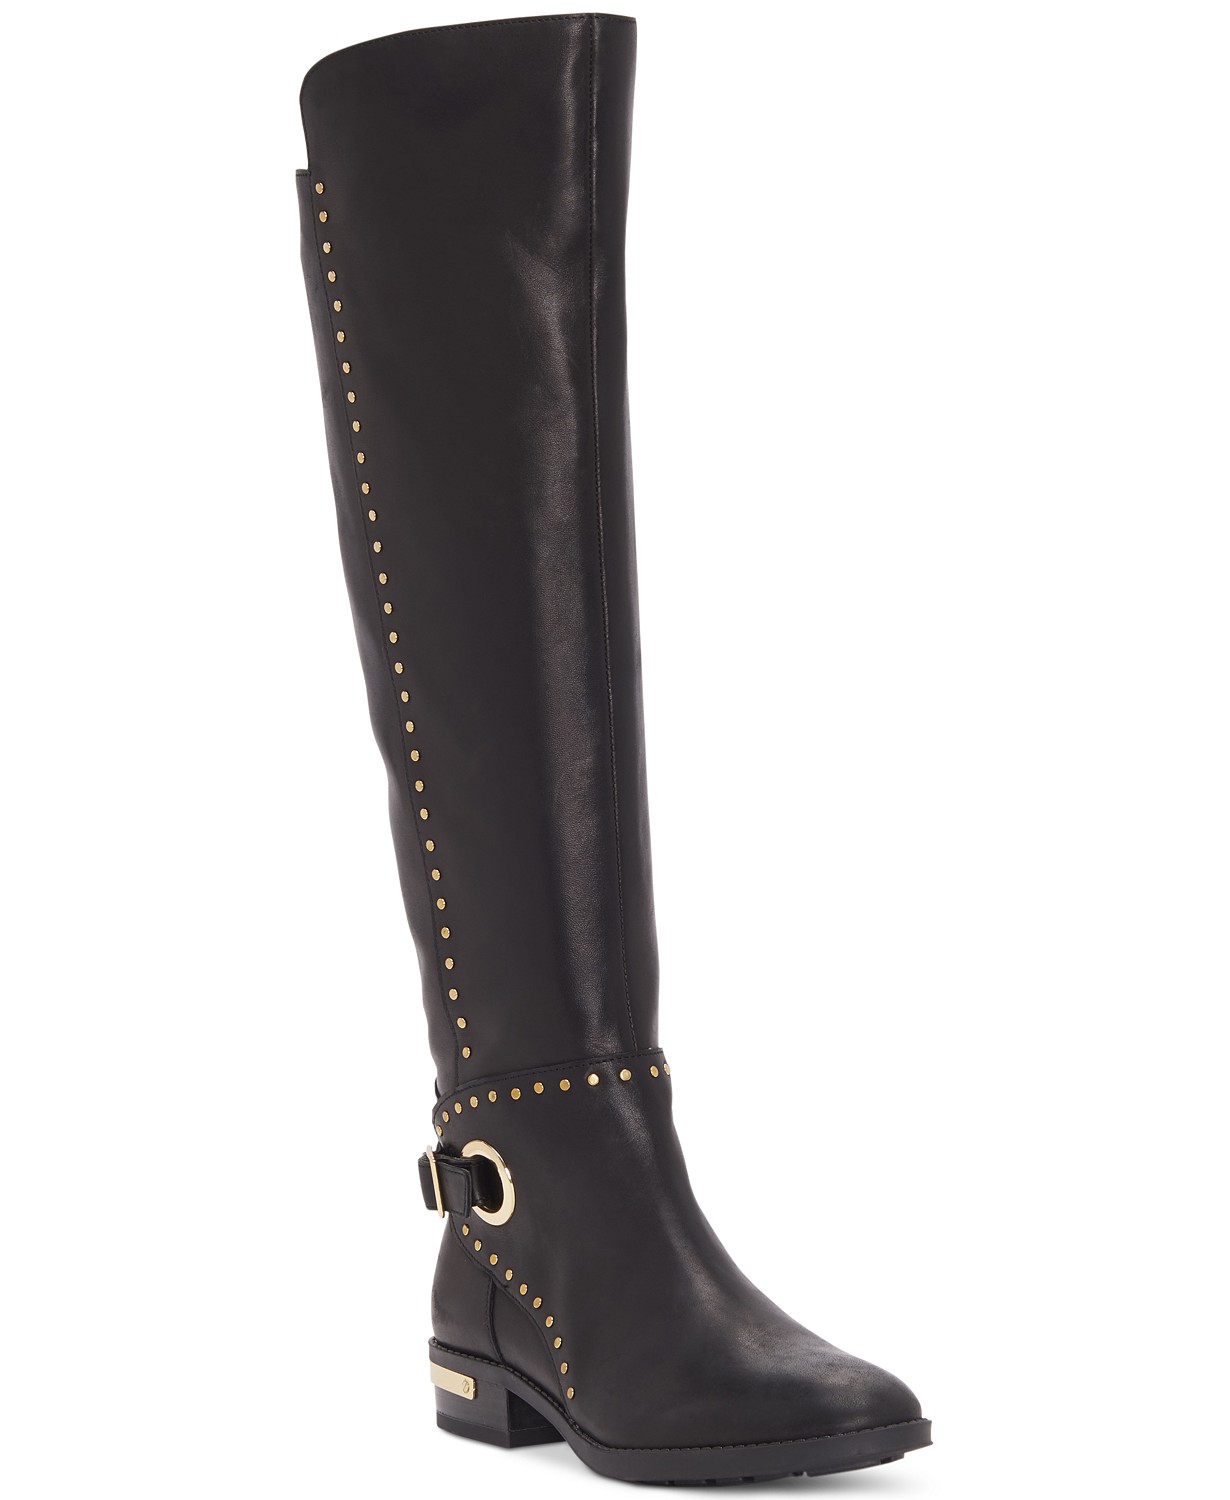 Vince Camuto Poppidal Tall Knee High Stretch Riding Boots Black Leather ...